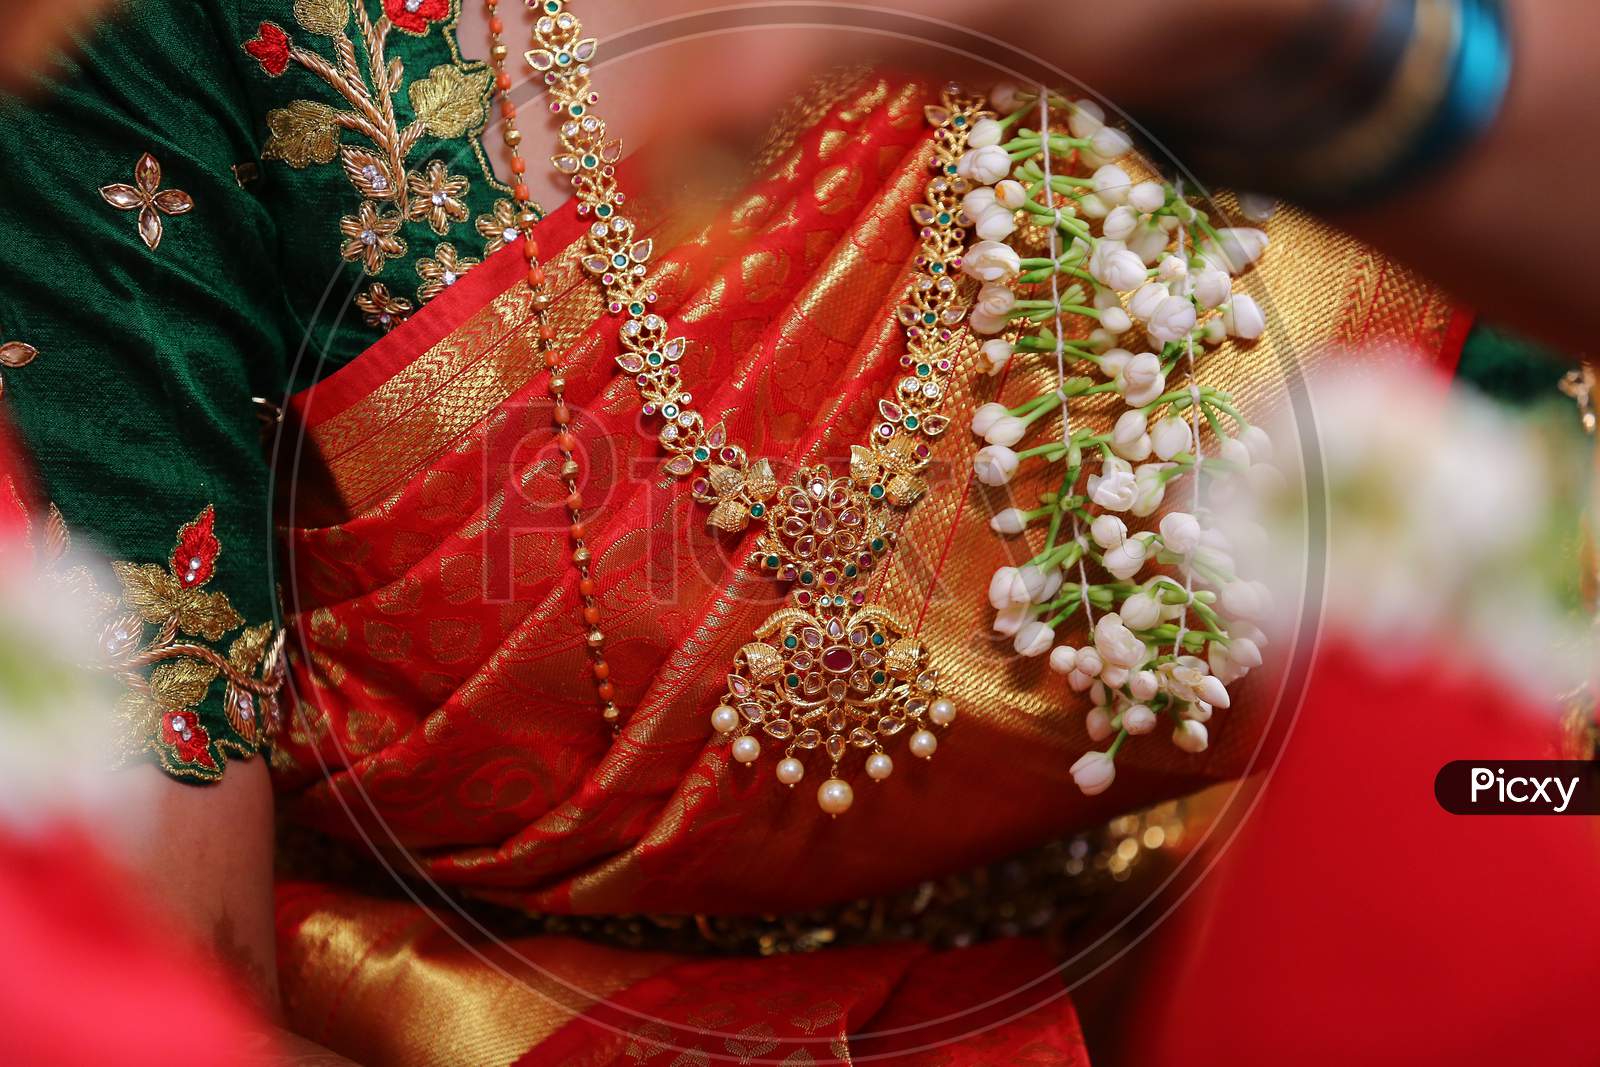 Bride With Elegant Jewelery At An Indian Wedding